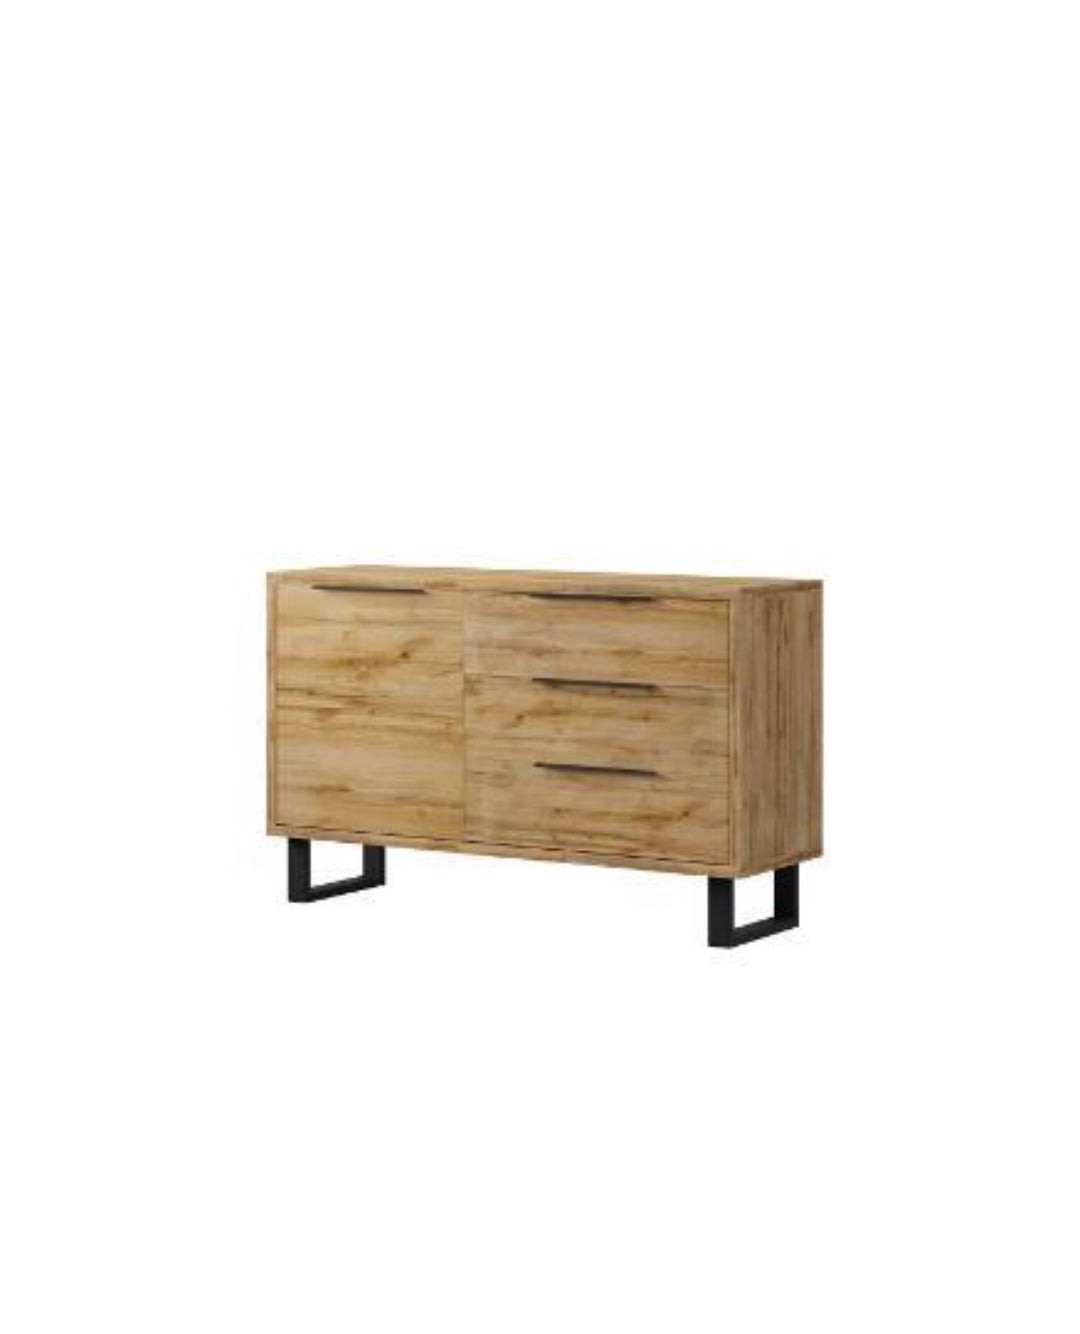 View Halle 47 Sideboard Cabinet information